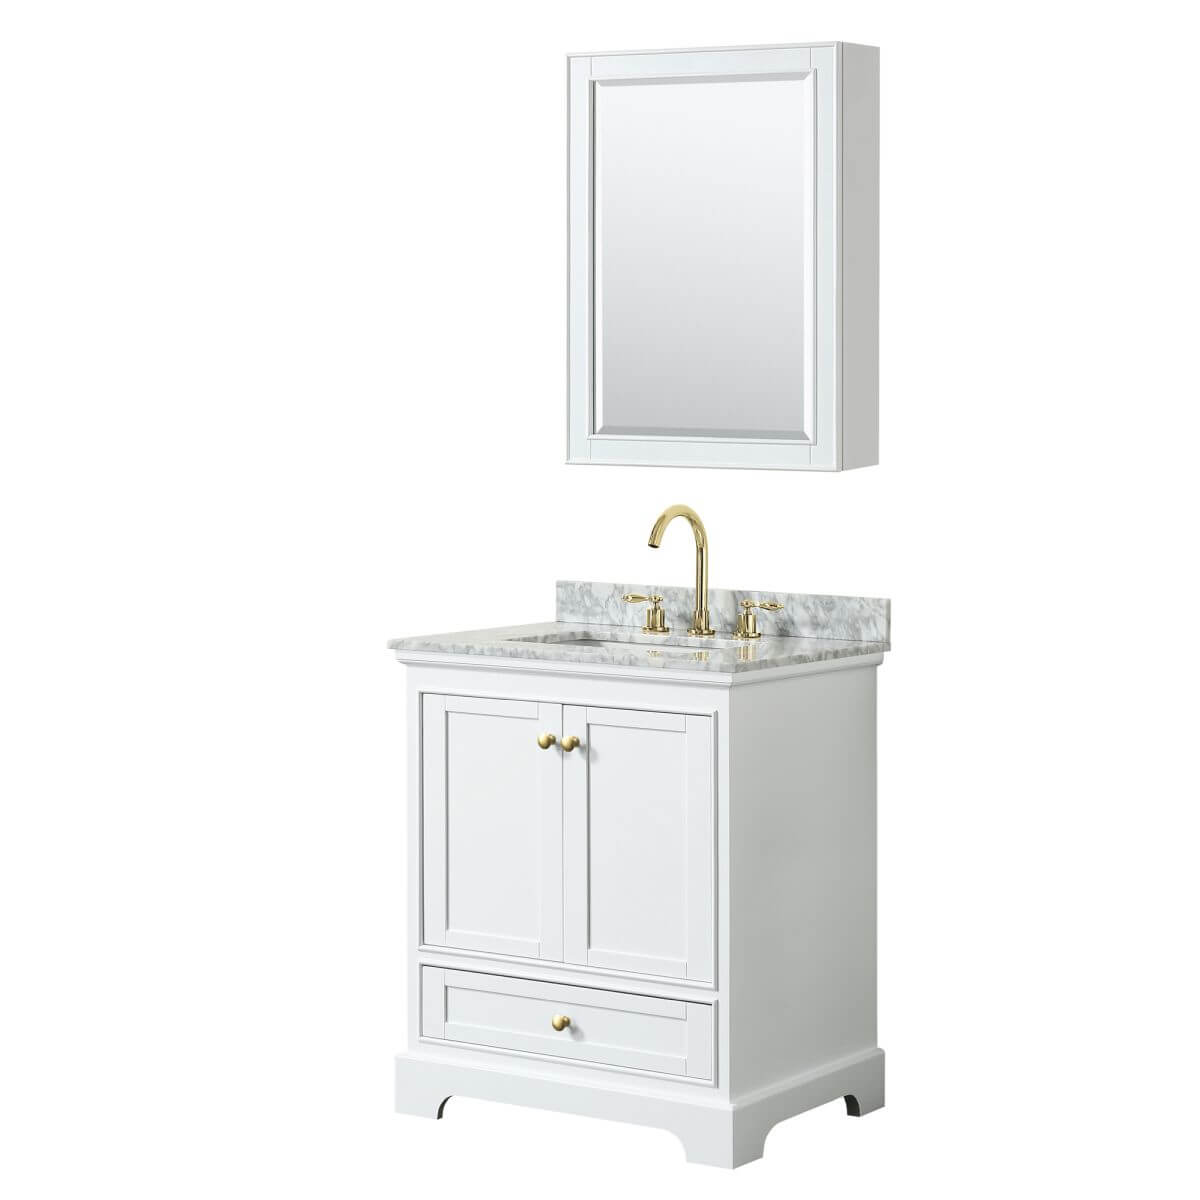 Wyndham Collection Deborah 30 inch Single Bathroom Vanity in White with White Carrara Marble Countertop, Undermount Square Sink, Brushed Gold Trim and Medicine Cabinet - WCS202030SWGCMUNSMED